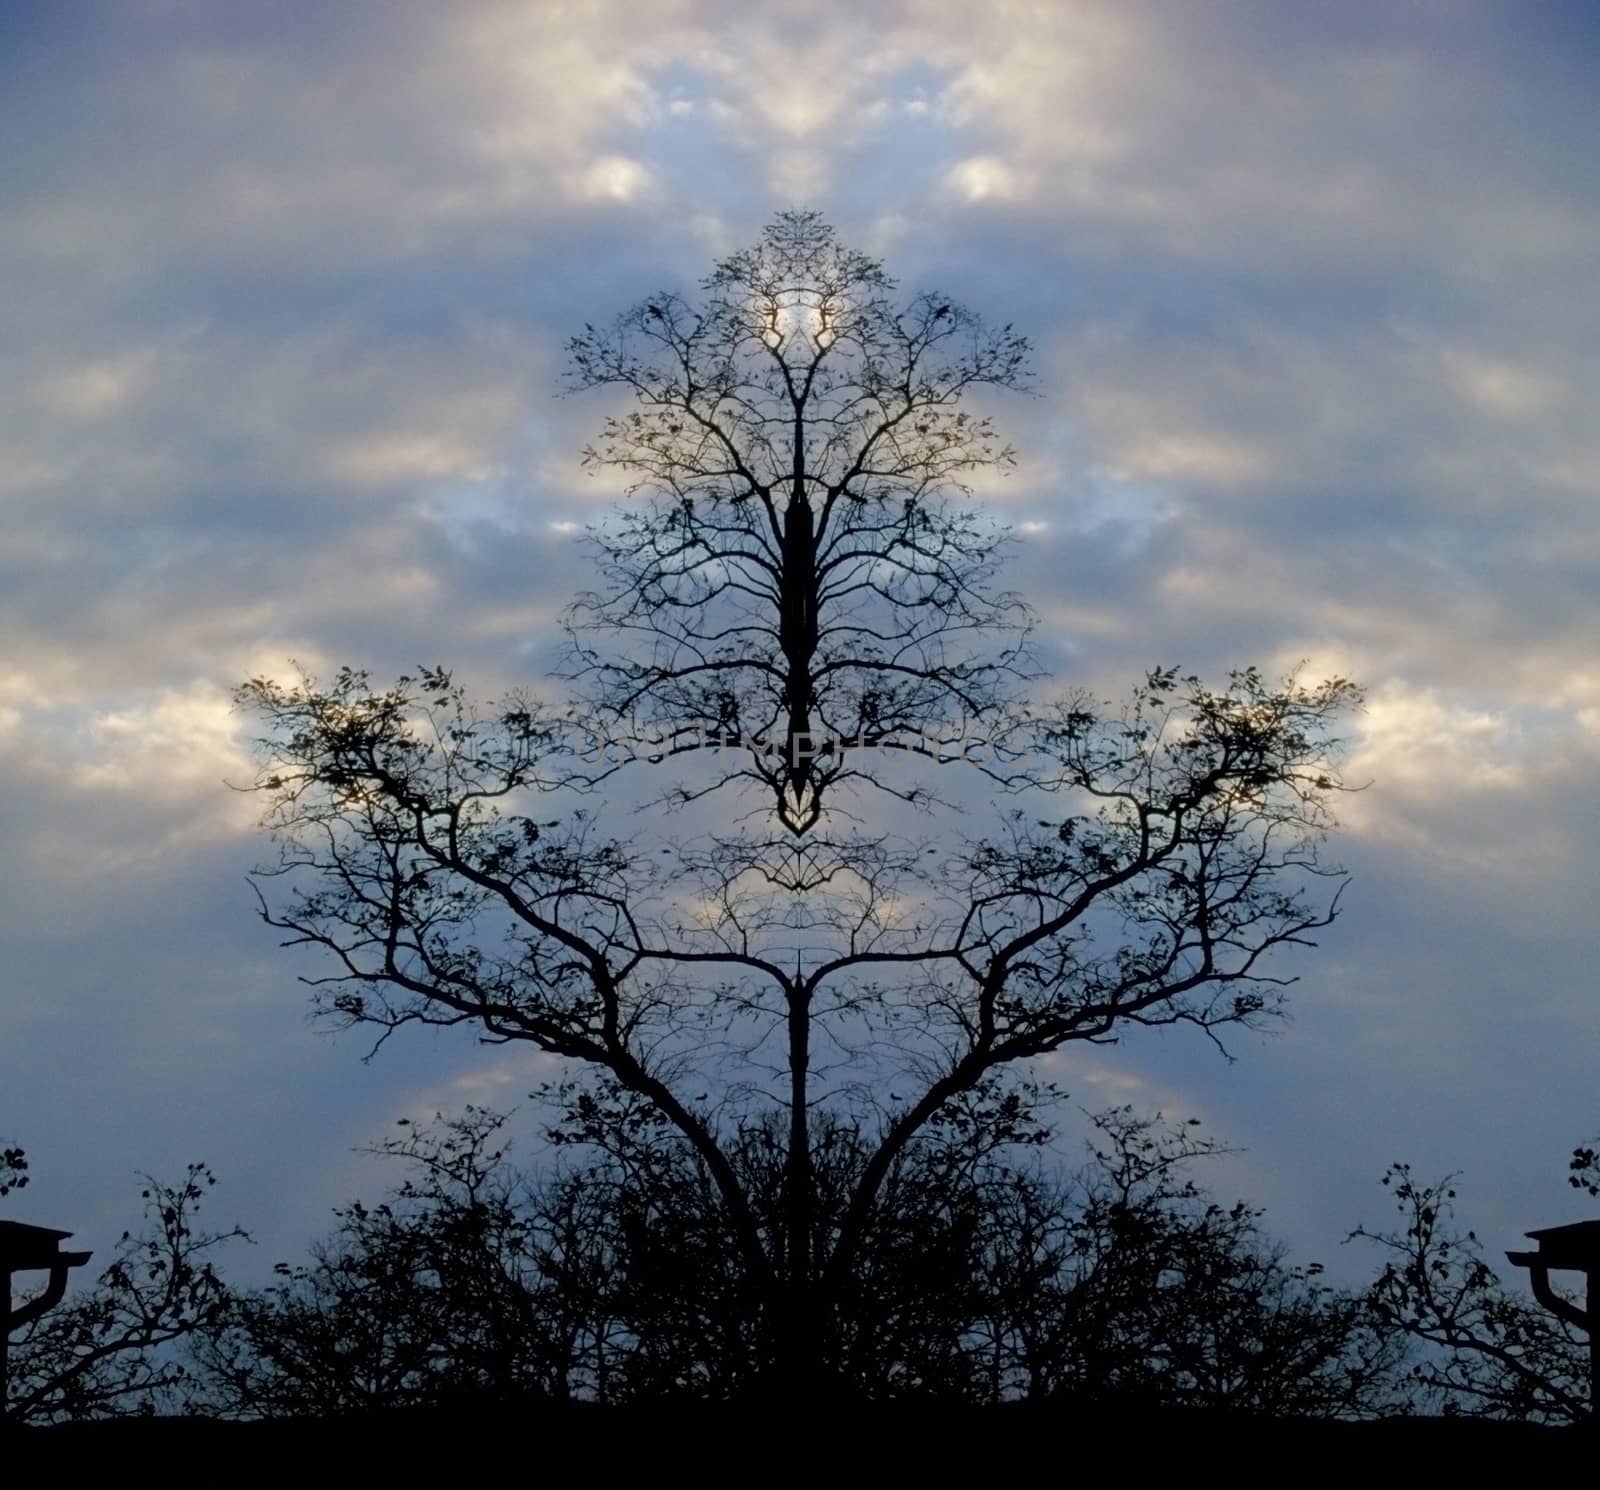 Surreal trees by applesstock